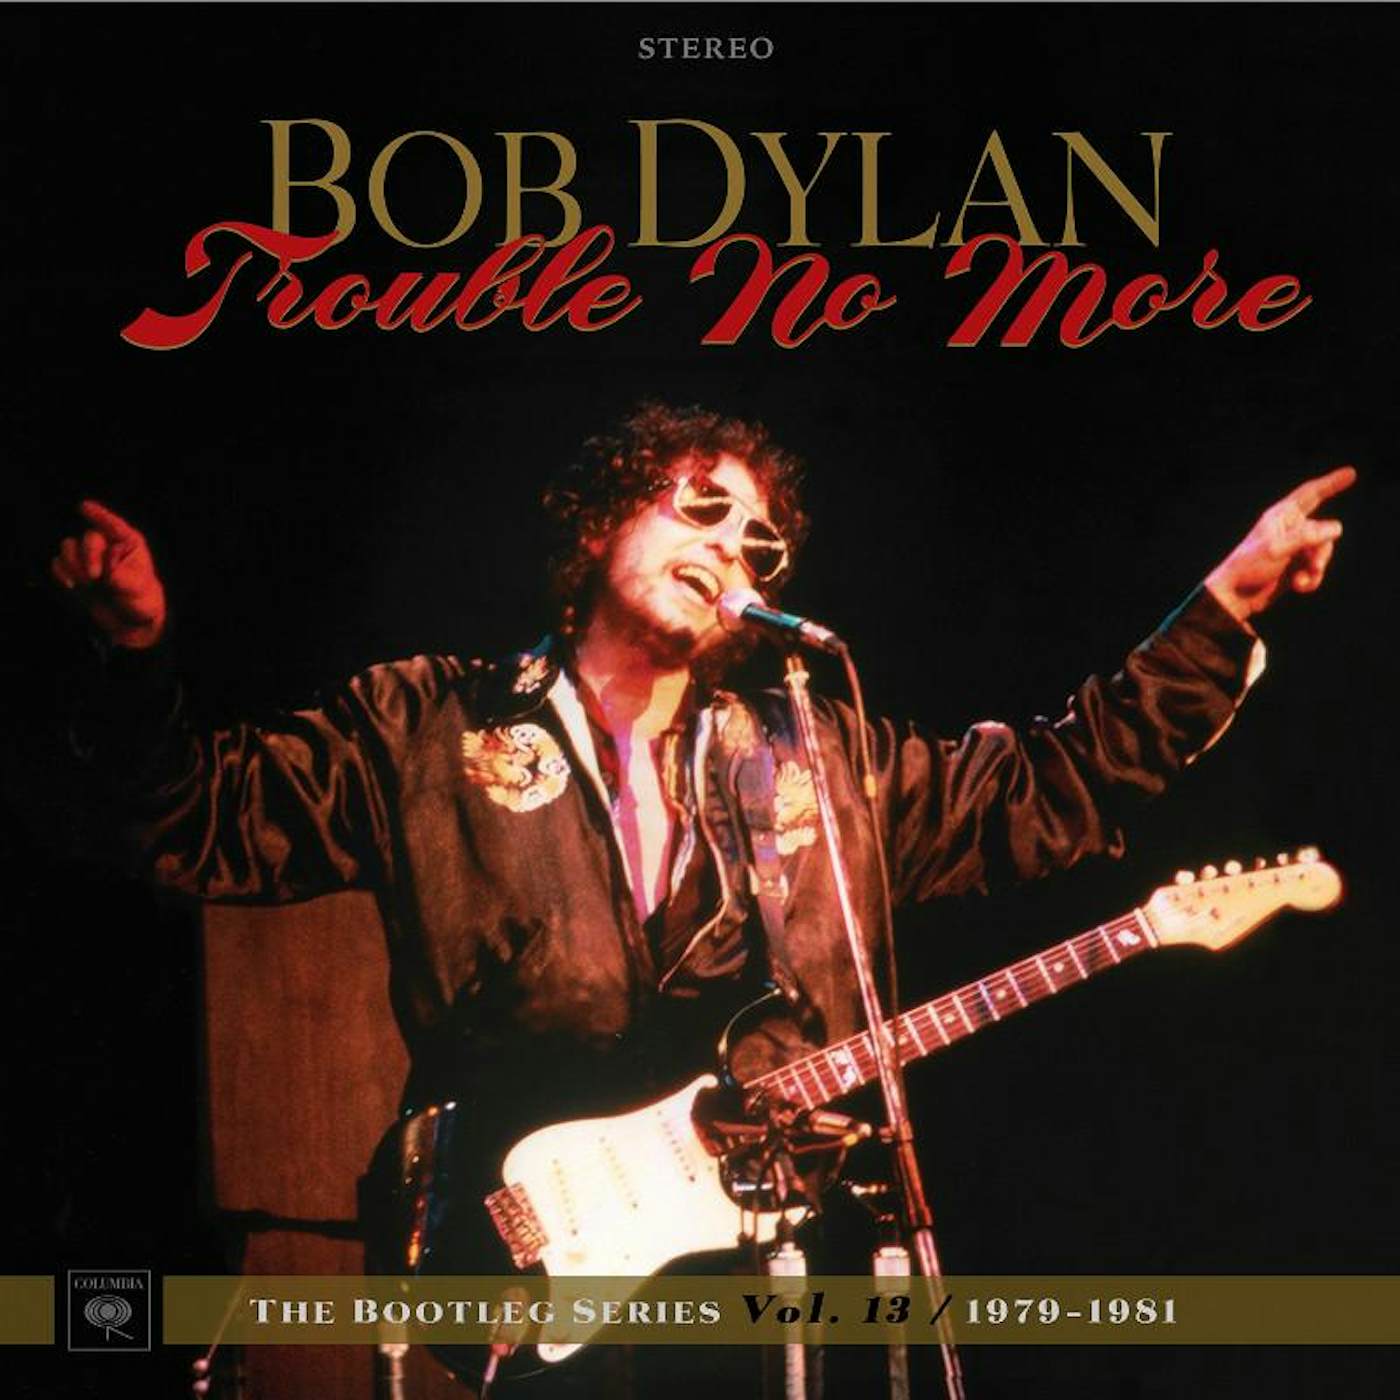 Bob Dylan Trouble No More: The Bootleg Series Vol. 13 (1979-1981) - 2CD